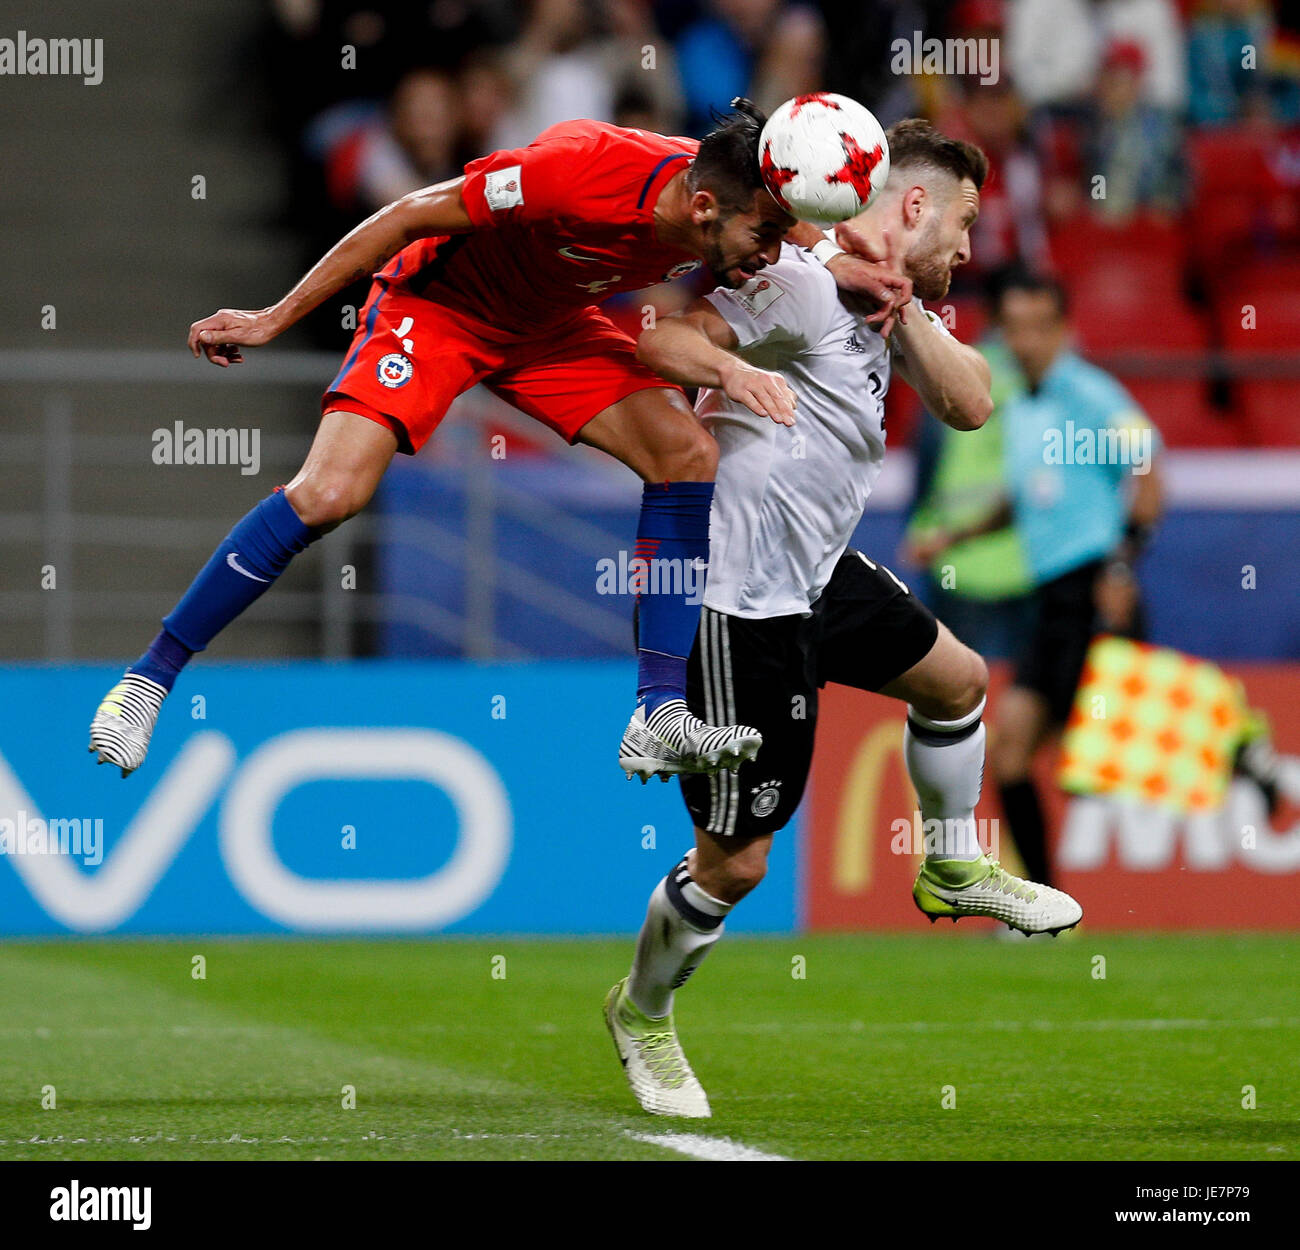 Kazan, Russia. 22nd Jun, 2017. ISLA Mauricio of Chile contests ball with MUSTAFI Shkodran of Germany during match between Germany and Chile valid for the second round of the Confederations Cup 2017, this Thursday (22), held in Arena Kazan, in Kazan, Russia. Credit: Foto Arena LTDA/Alamy Live News Stock Photo